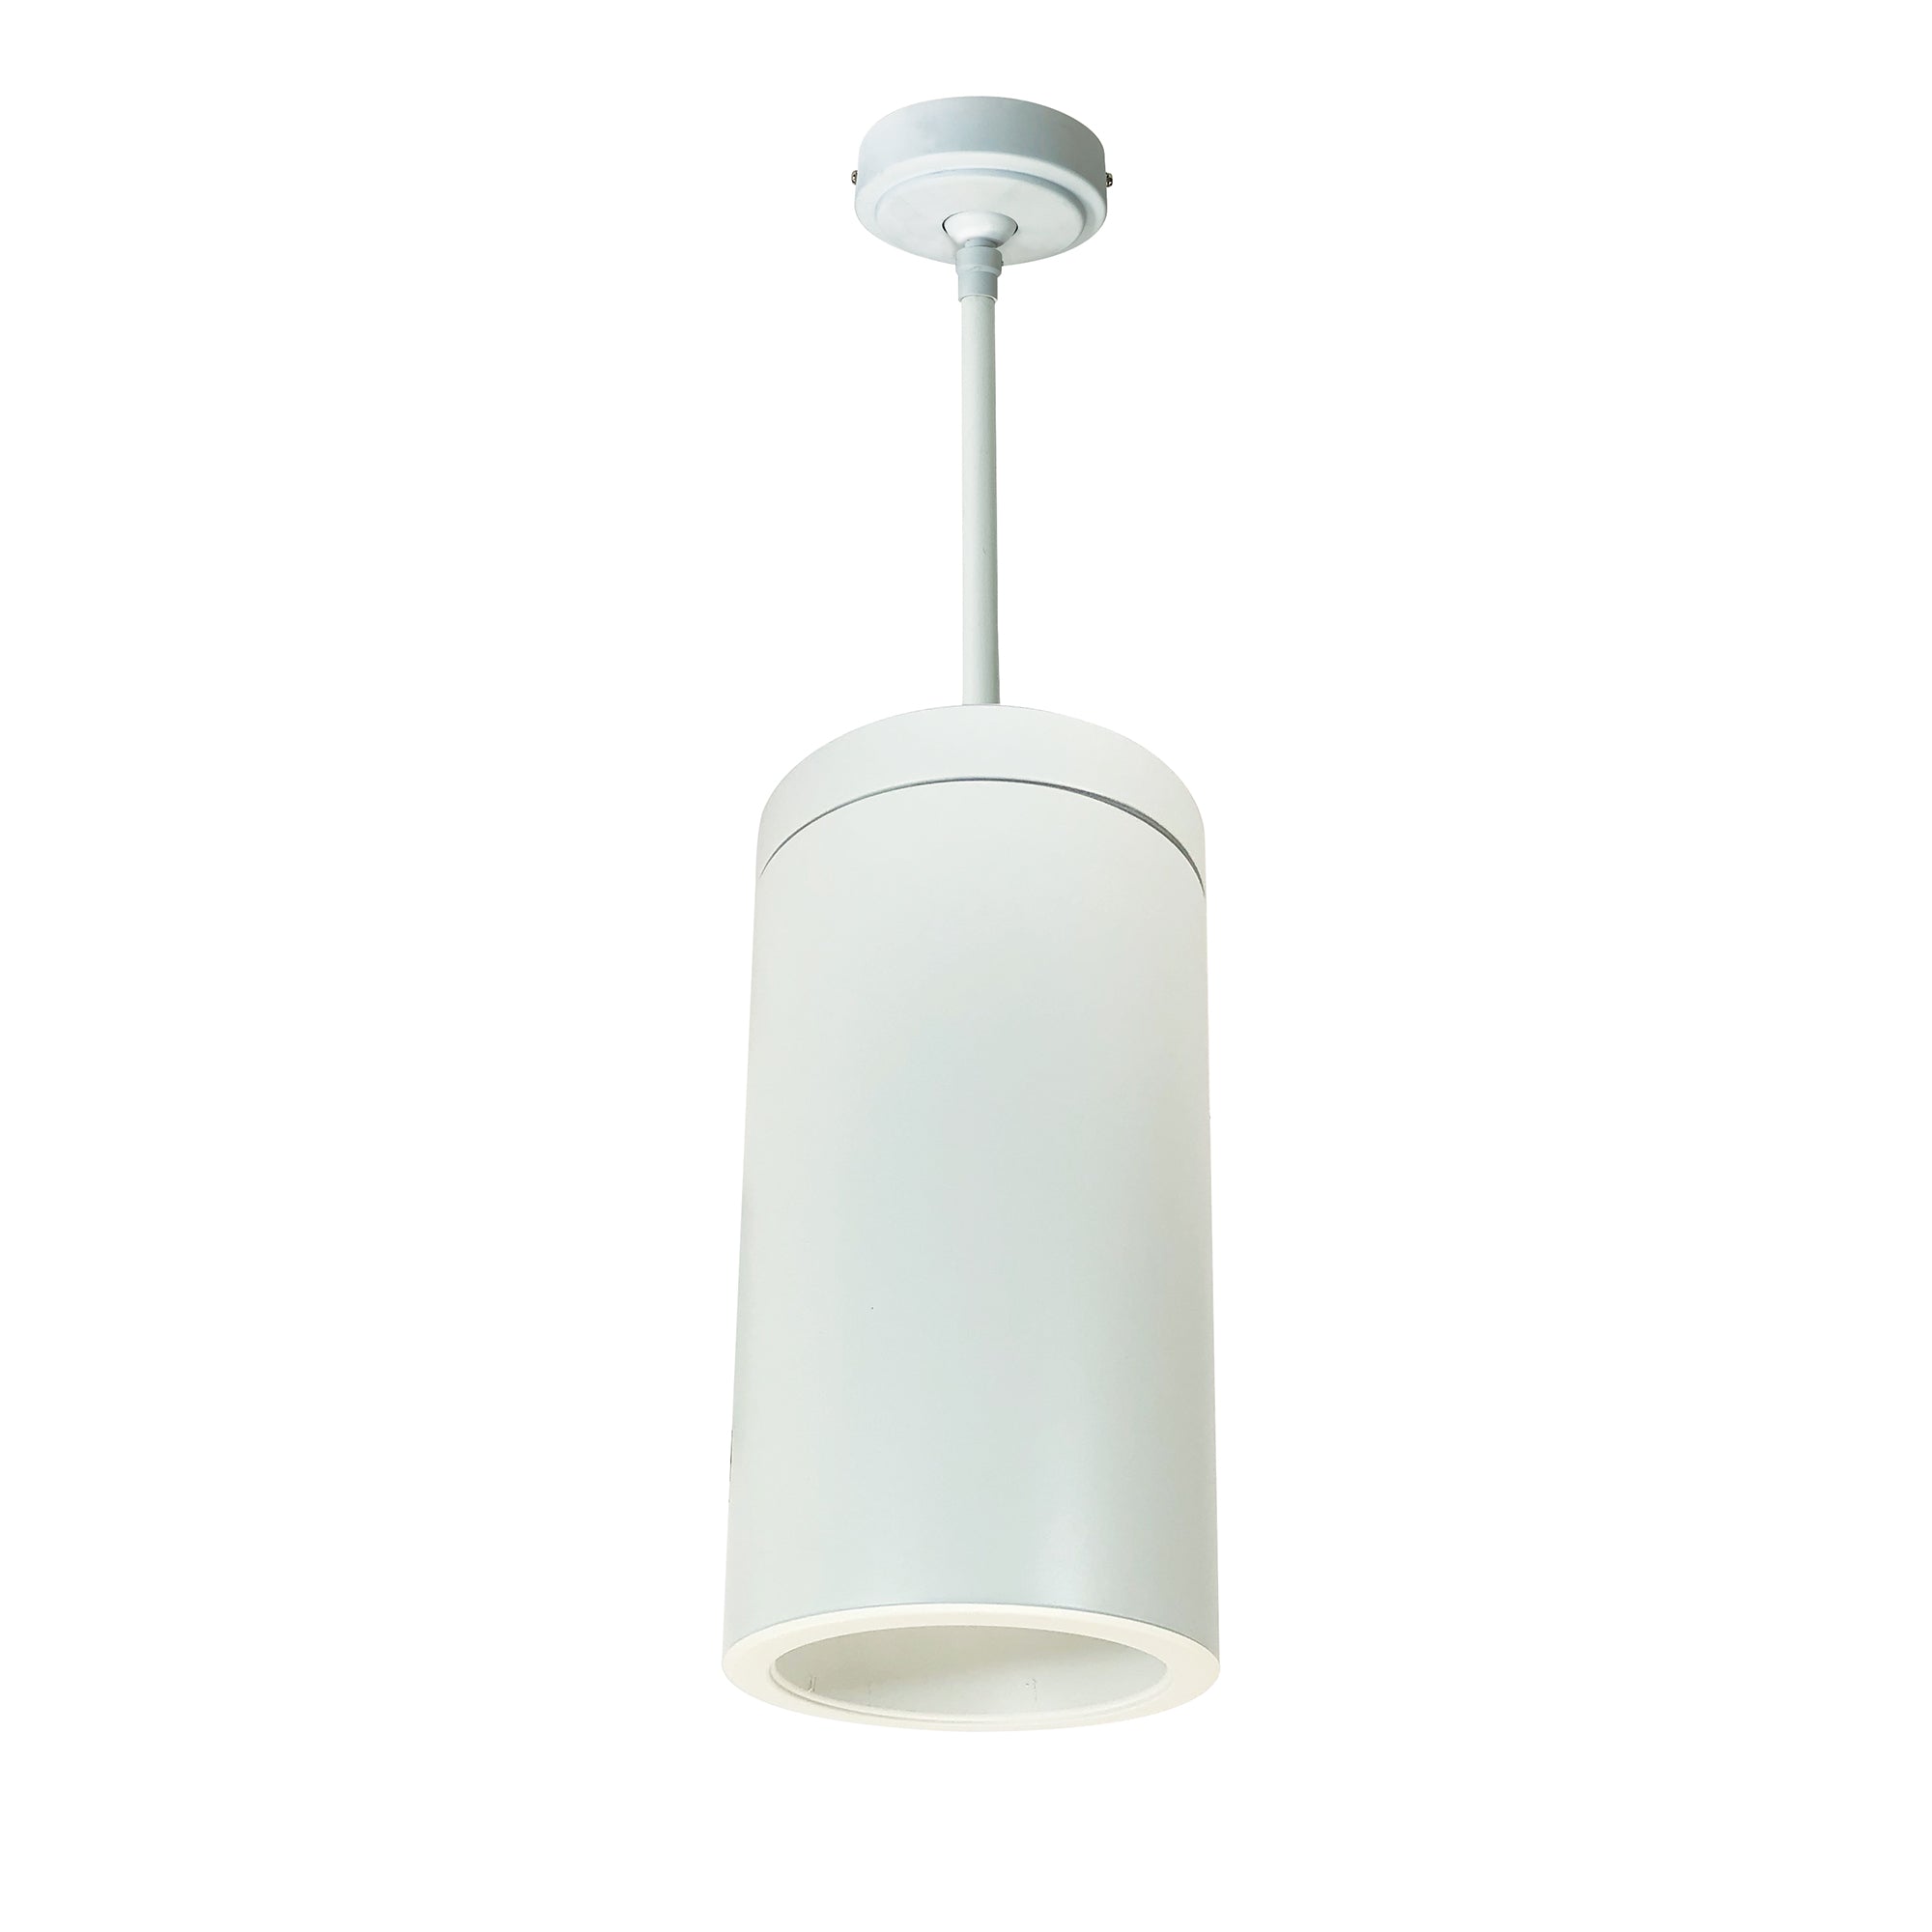 Nora Lighting LE45 - NYLS2-6P35130MWWW3